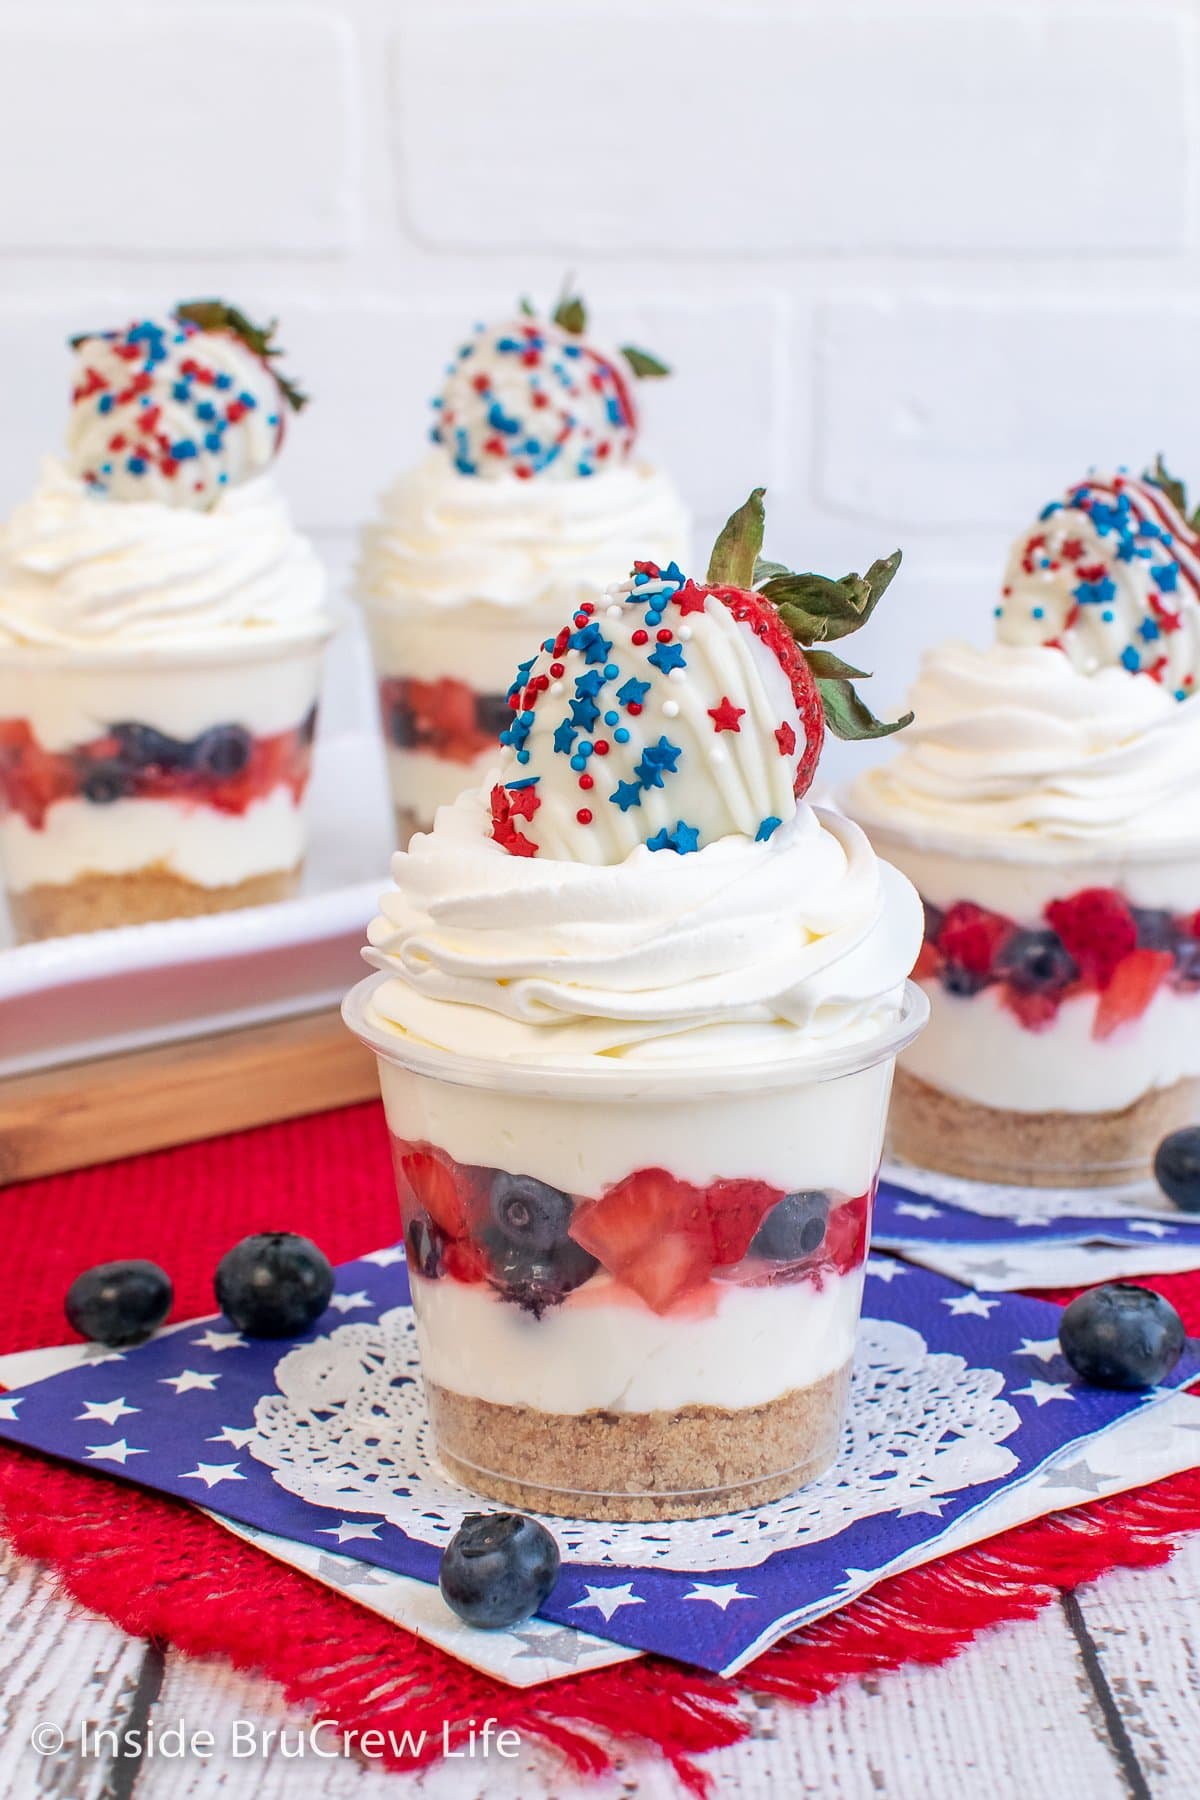 Cheesecake parfaits made with a layer of fresh fruit.